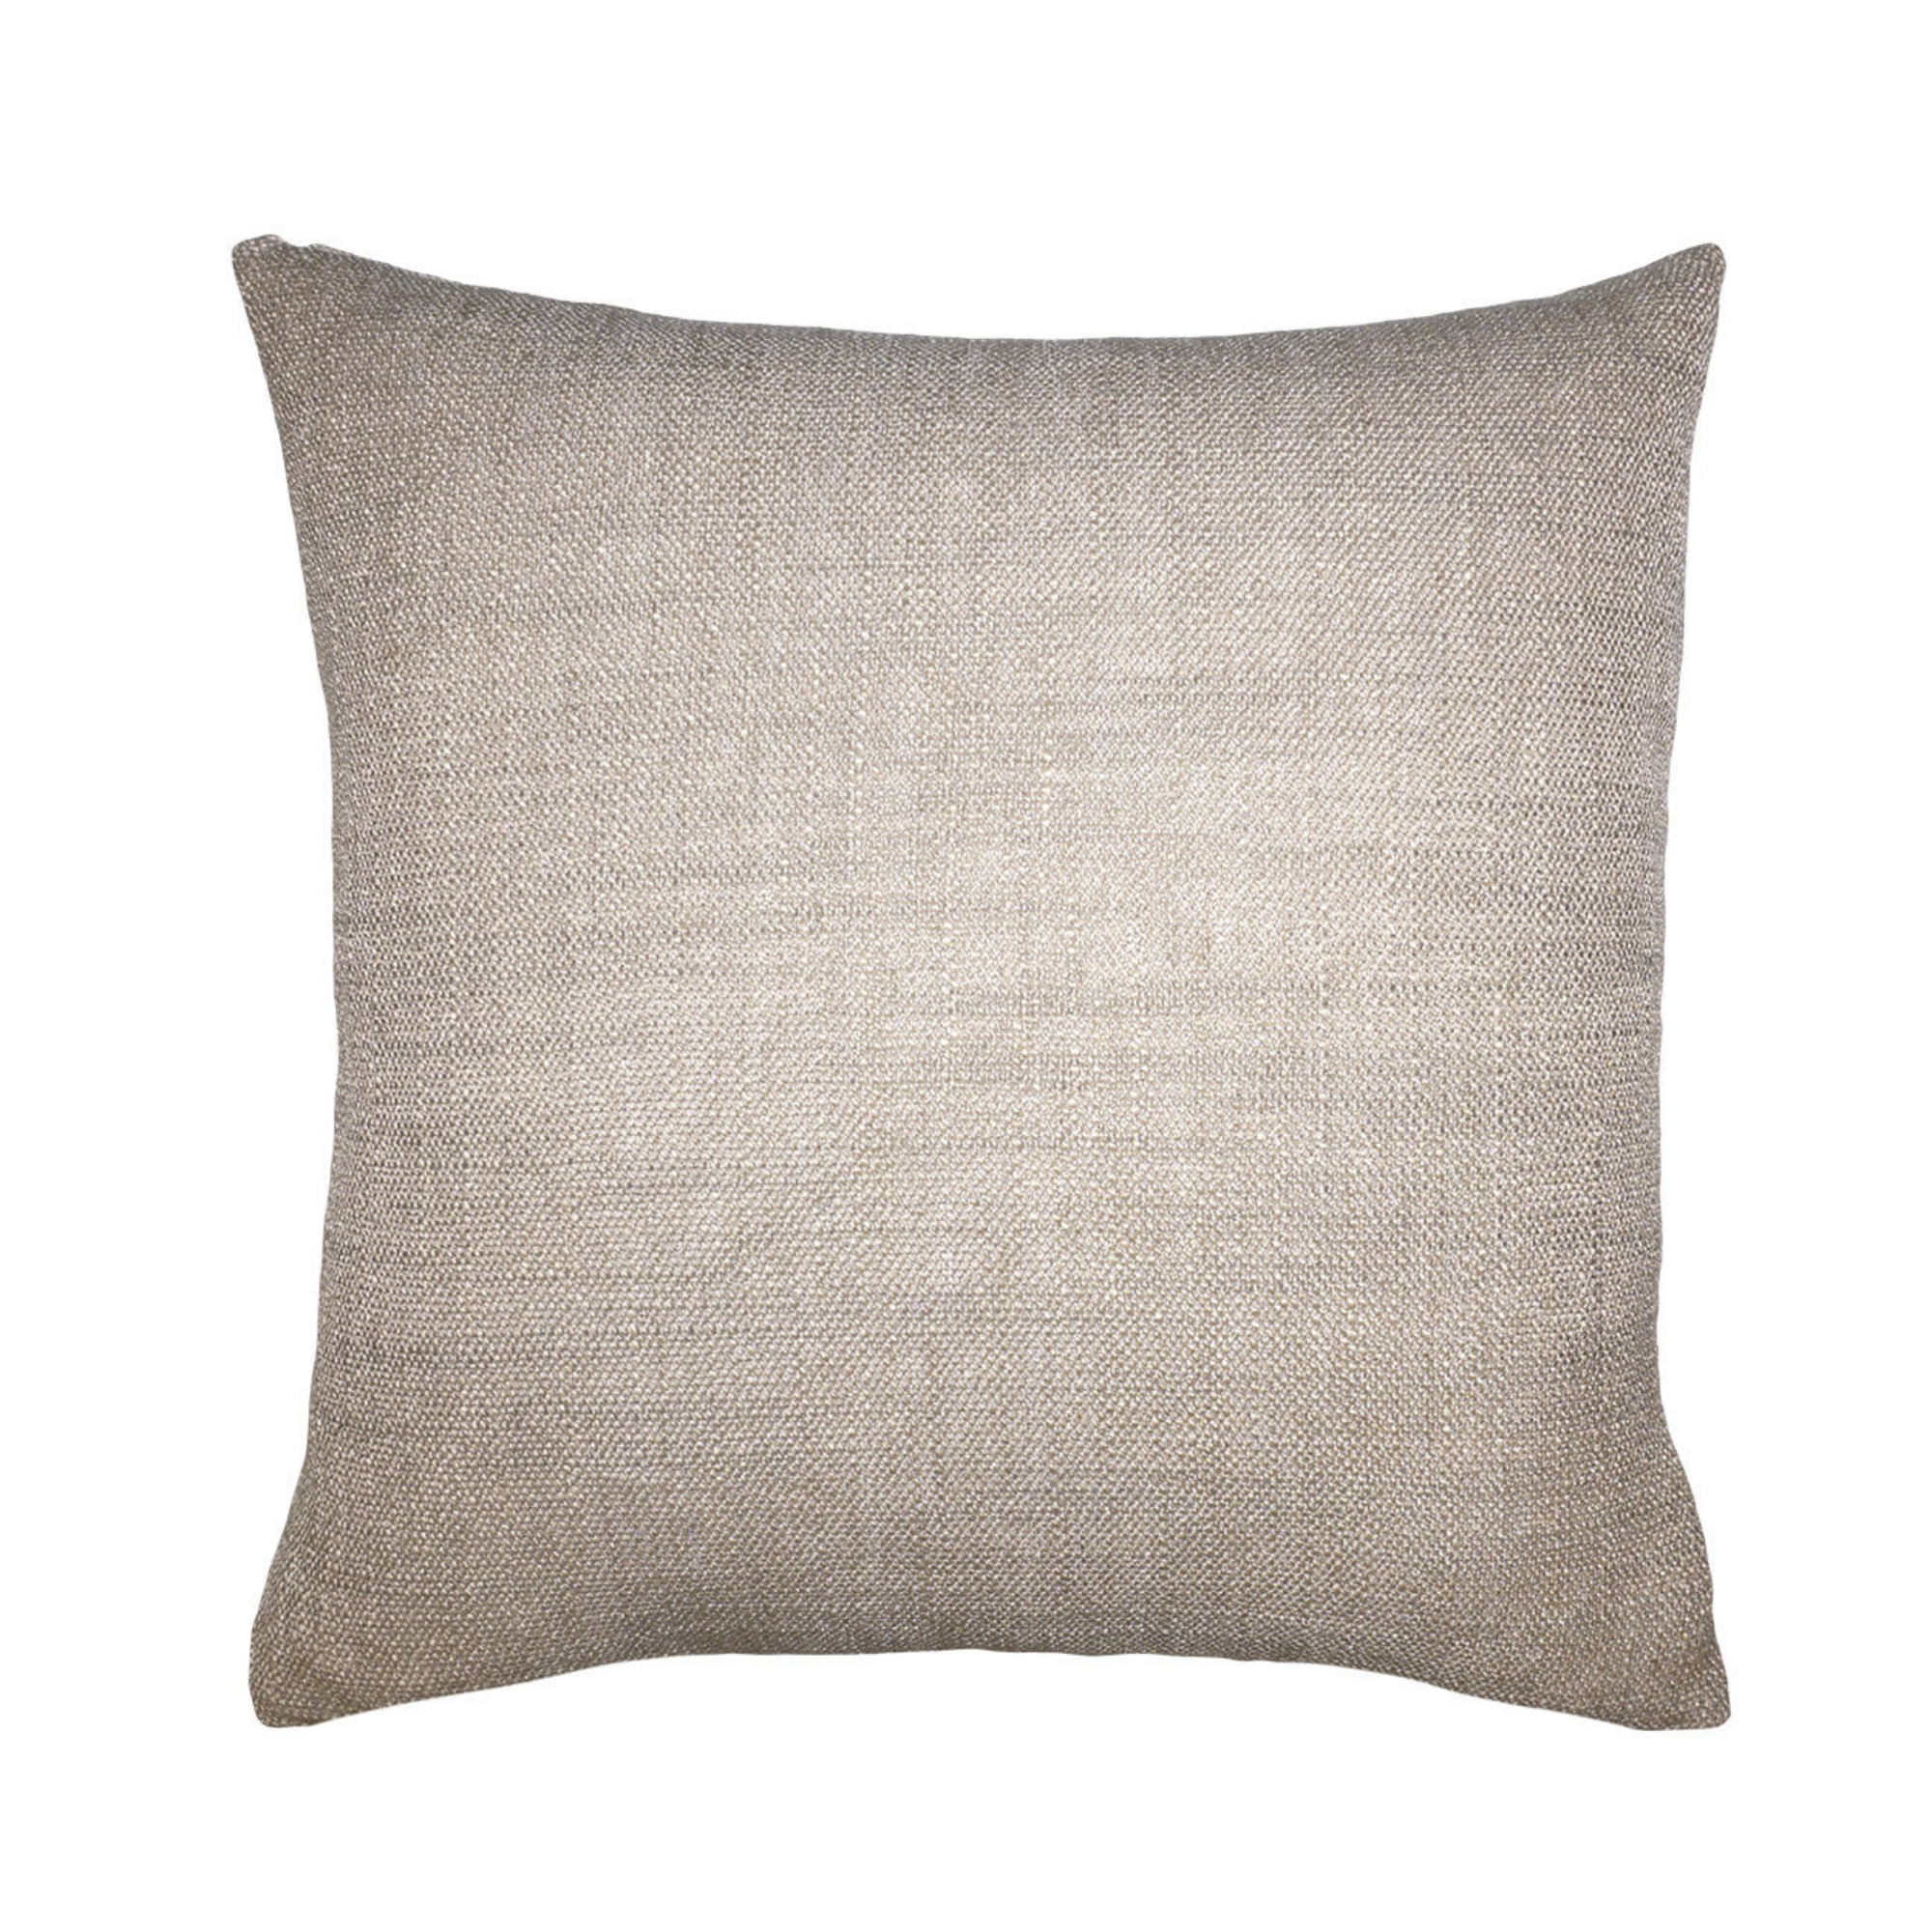 Hopsack Solid Pillow